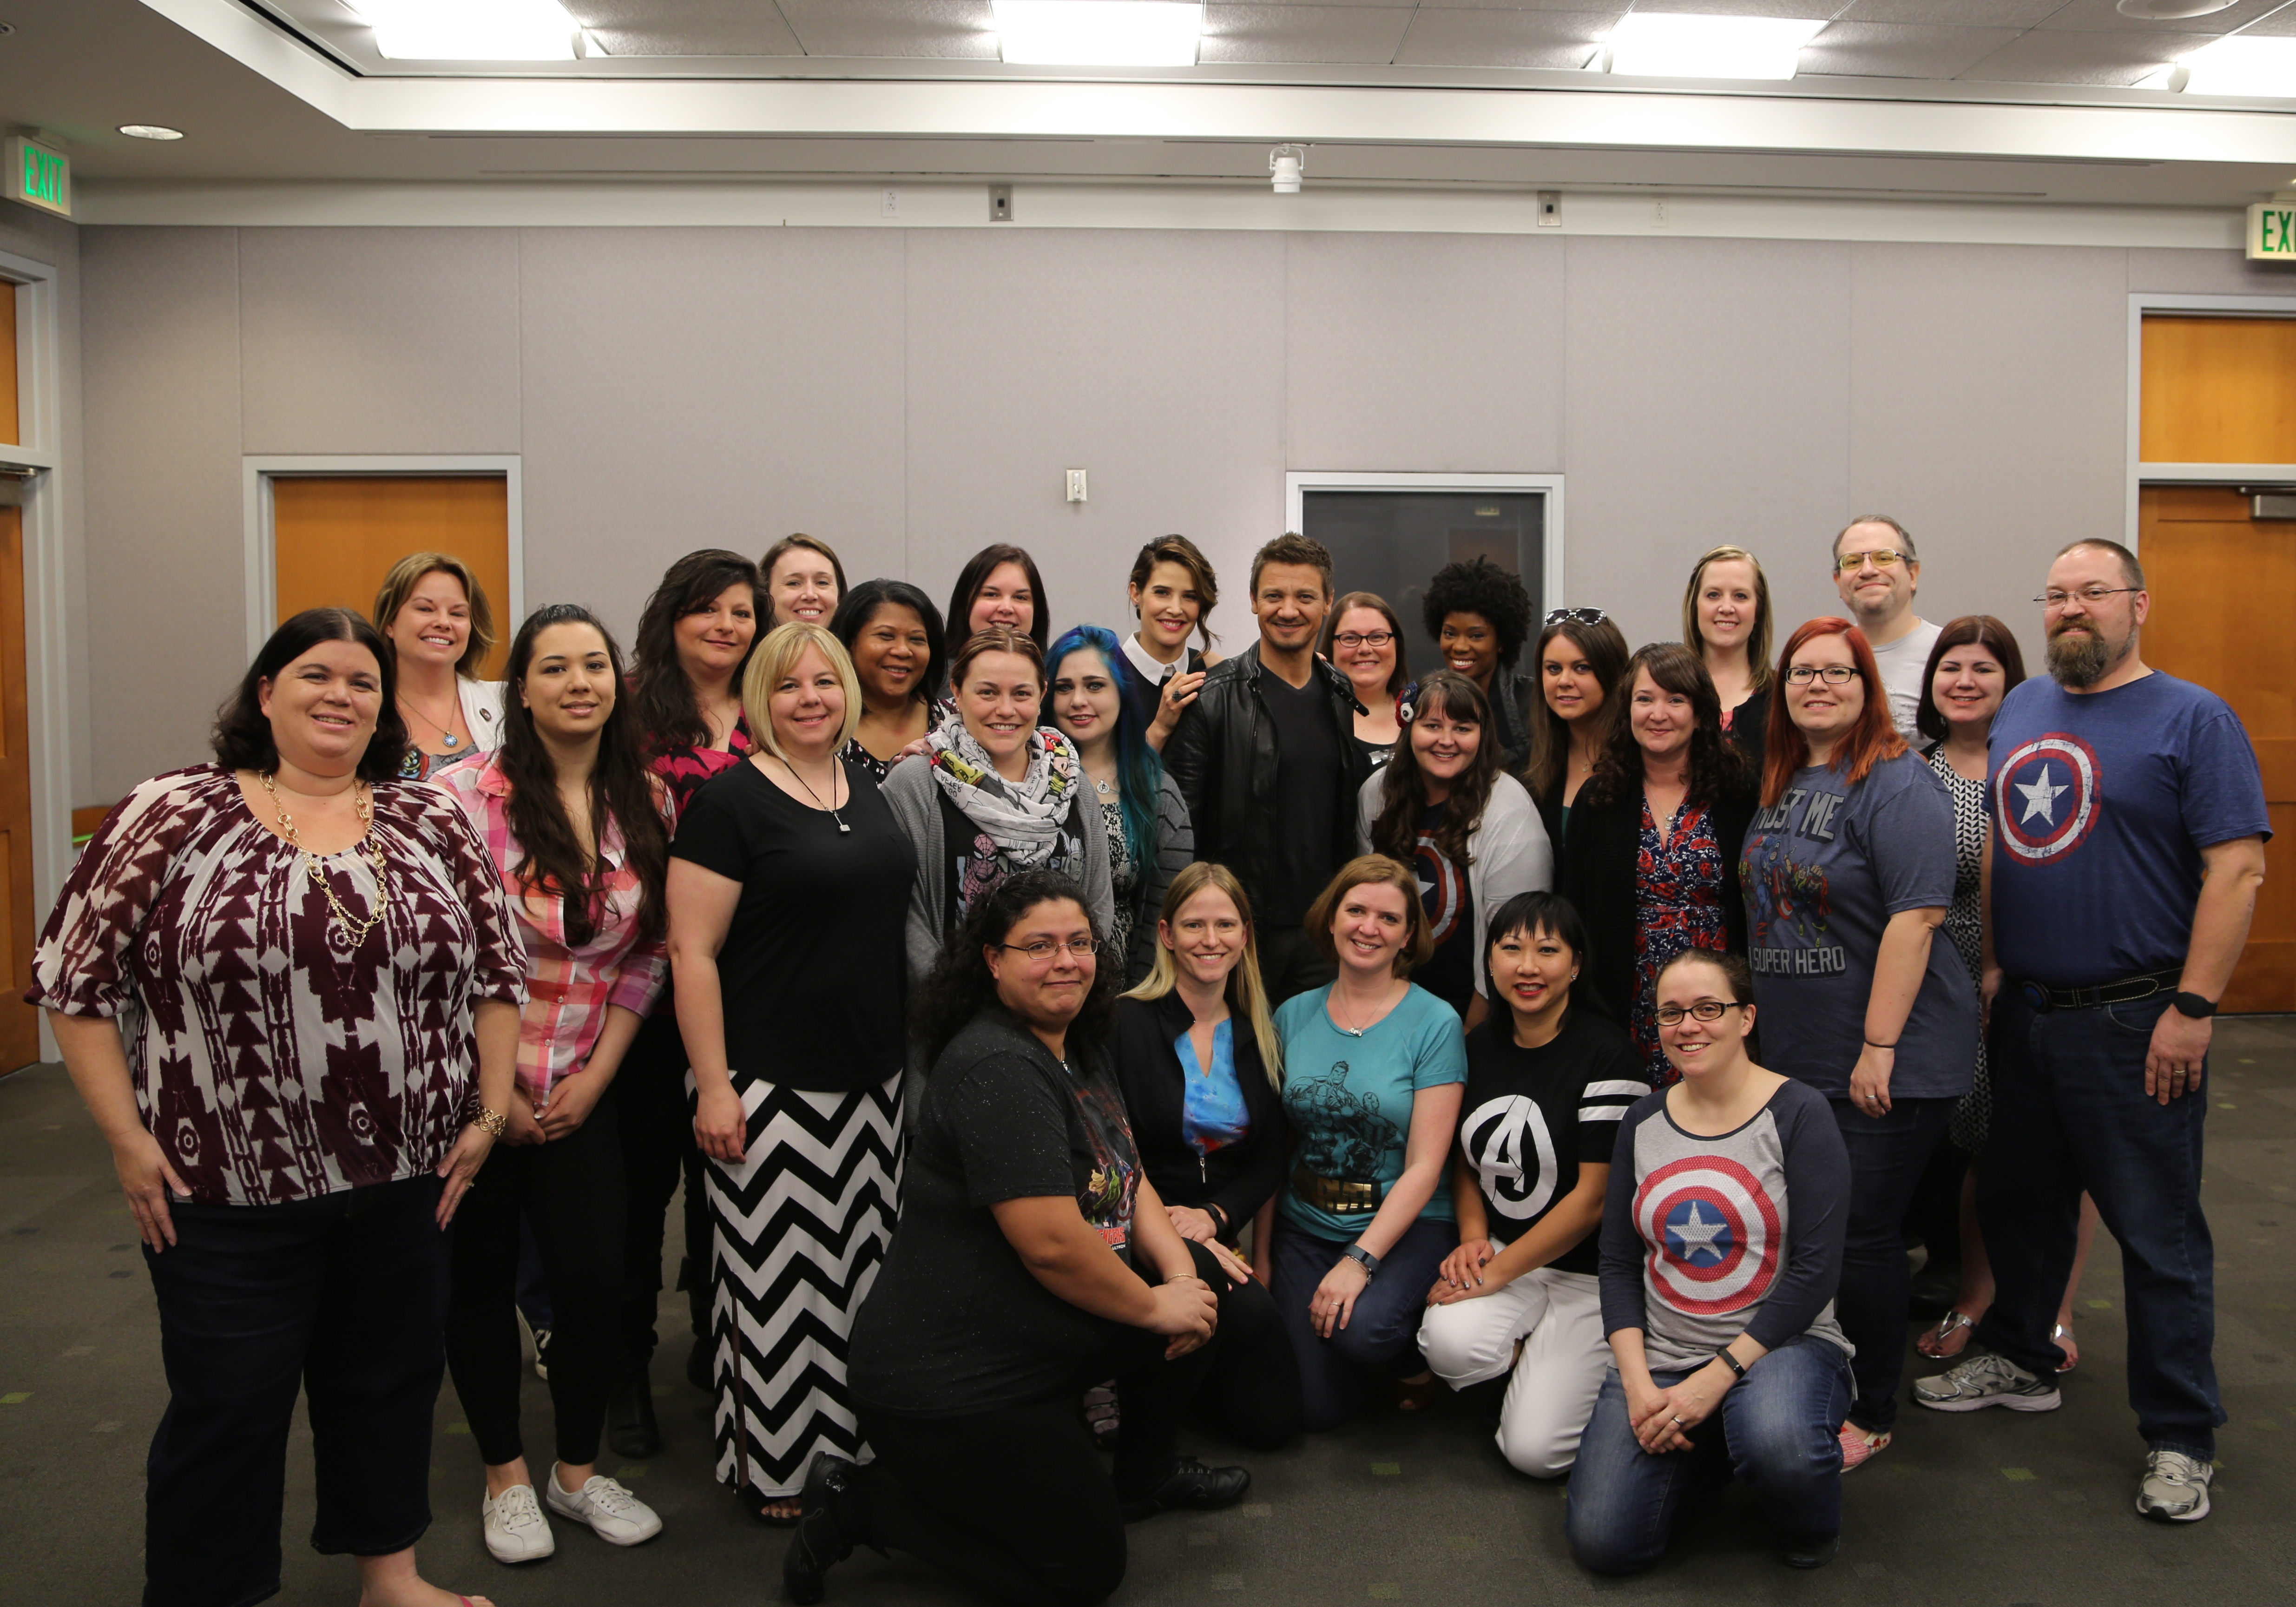 Jeremy Renner and Cobie Smulders with 25 #AvengersEvent Bloggers - Photo Credit - Disney